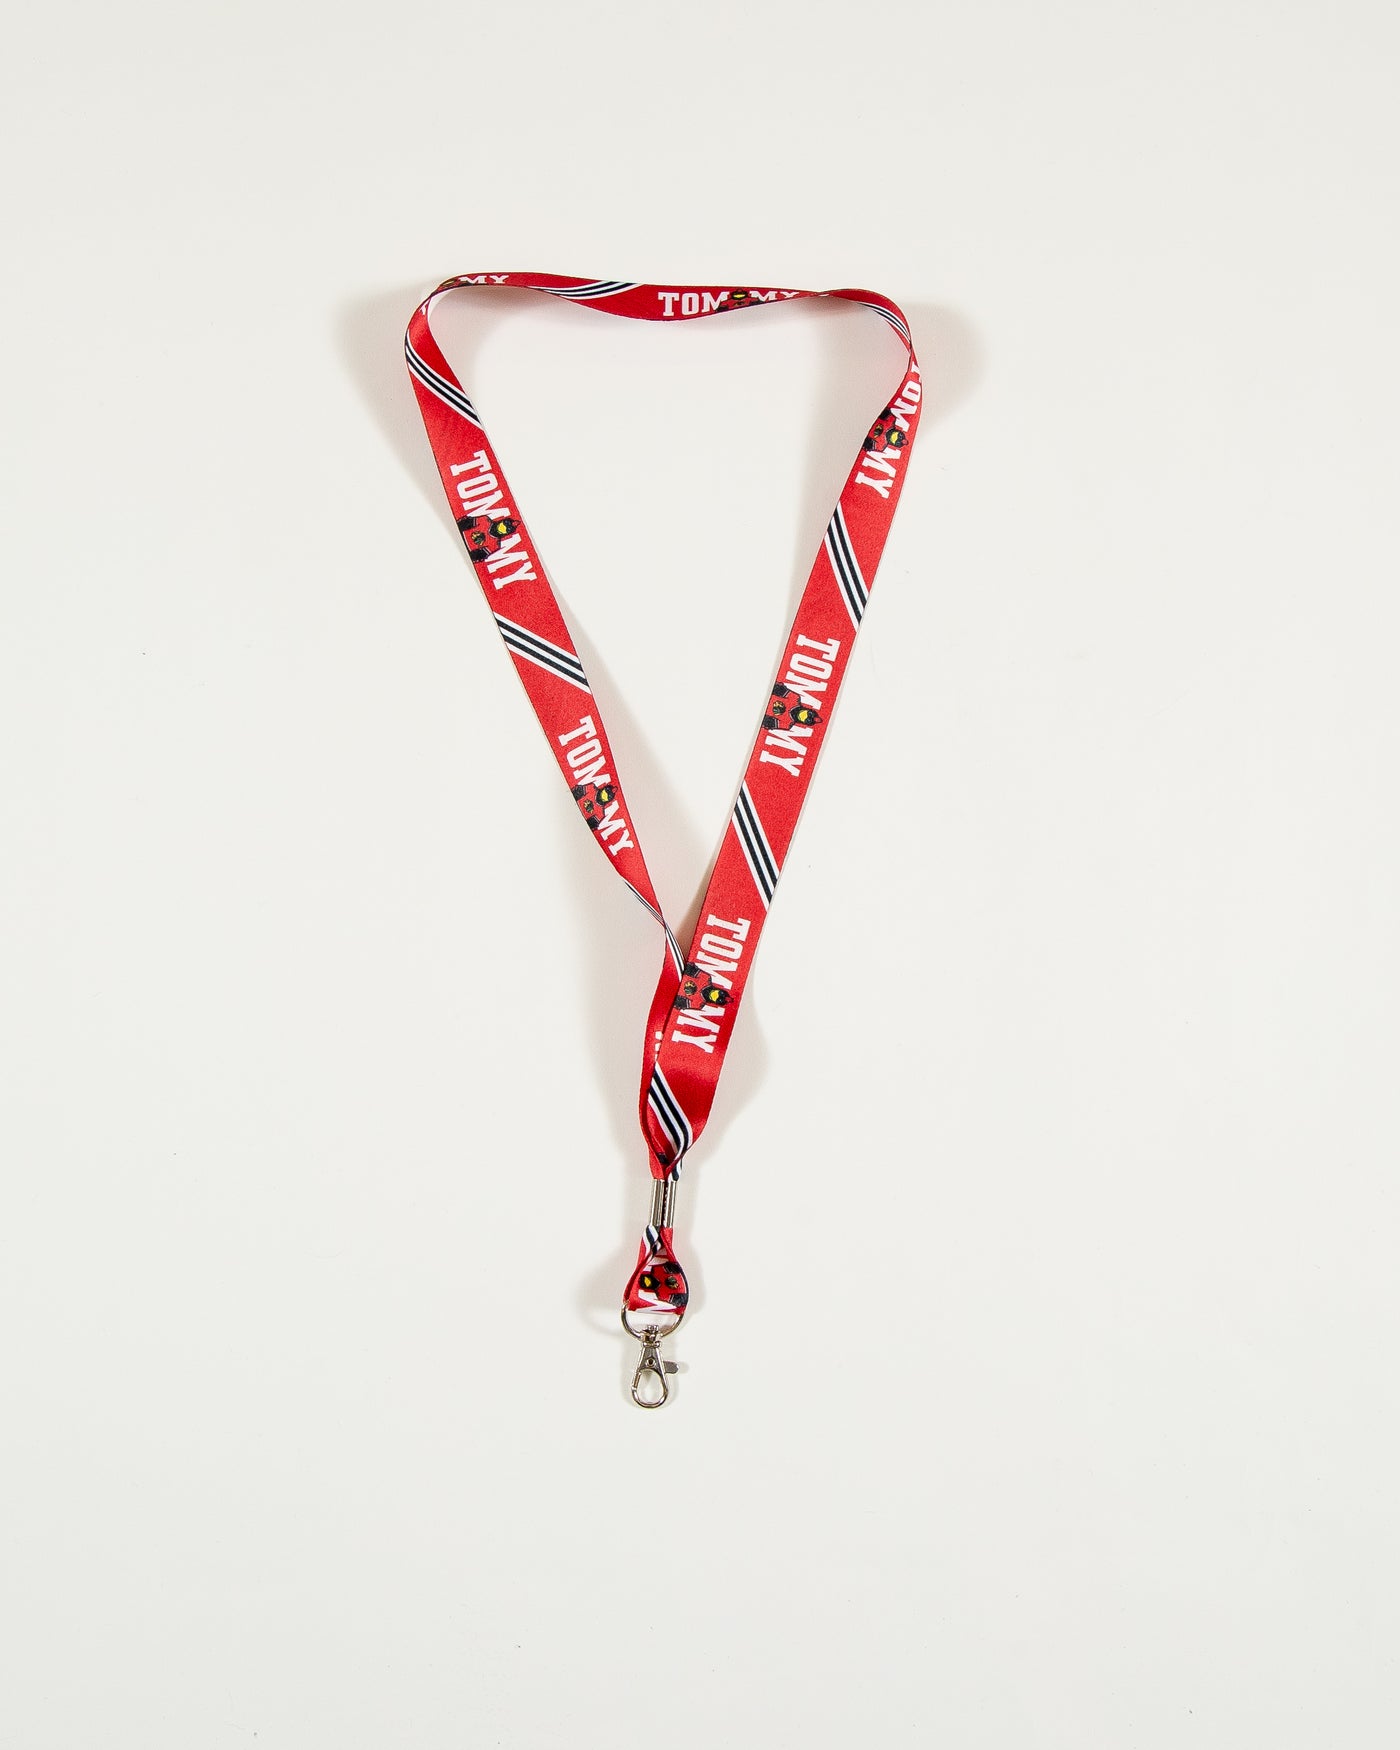 Chicago Blackhawks Tommy Hawk lanyard with jersey inspired design - front lay flat